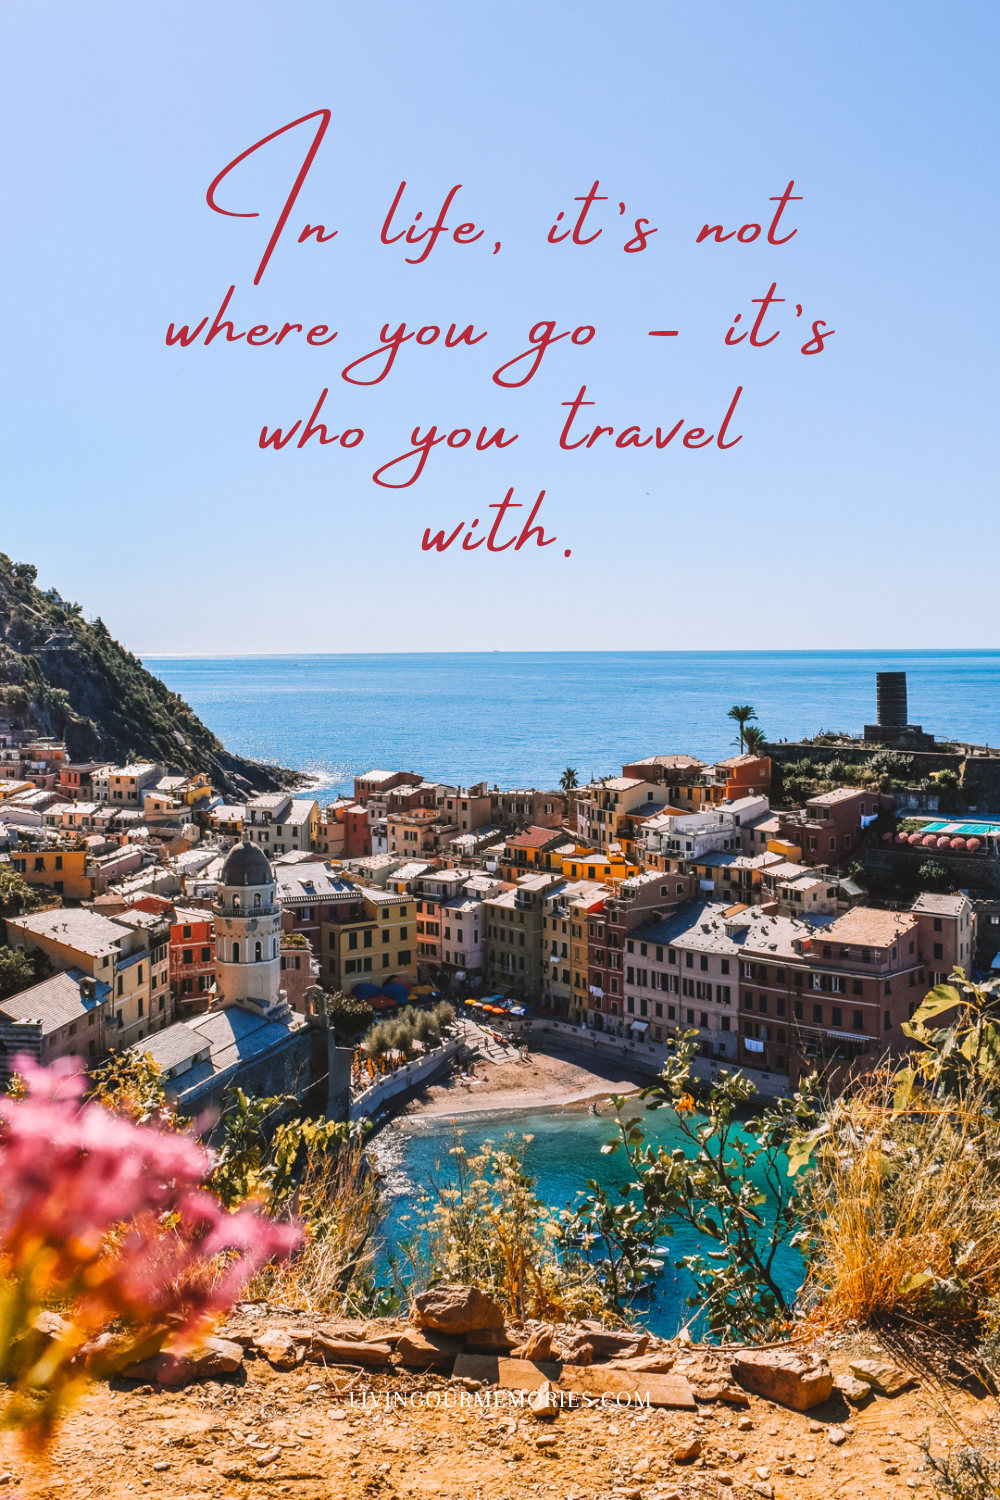 In life, it's not where you go - it's who you travel with,